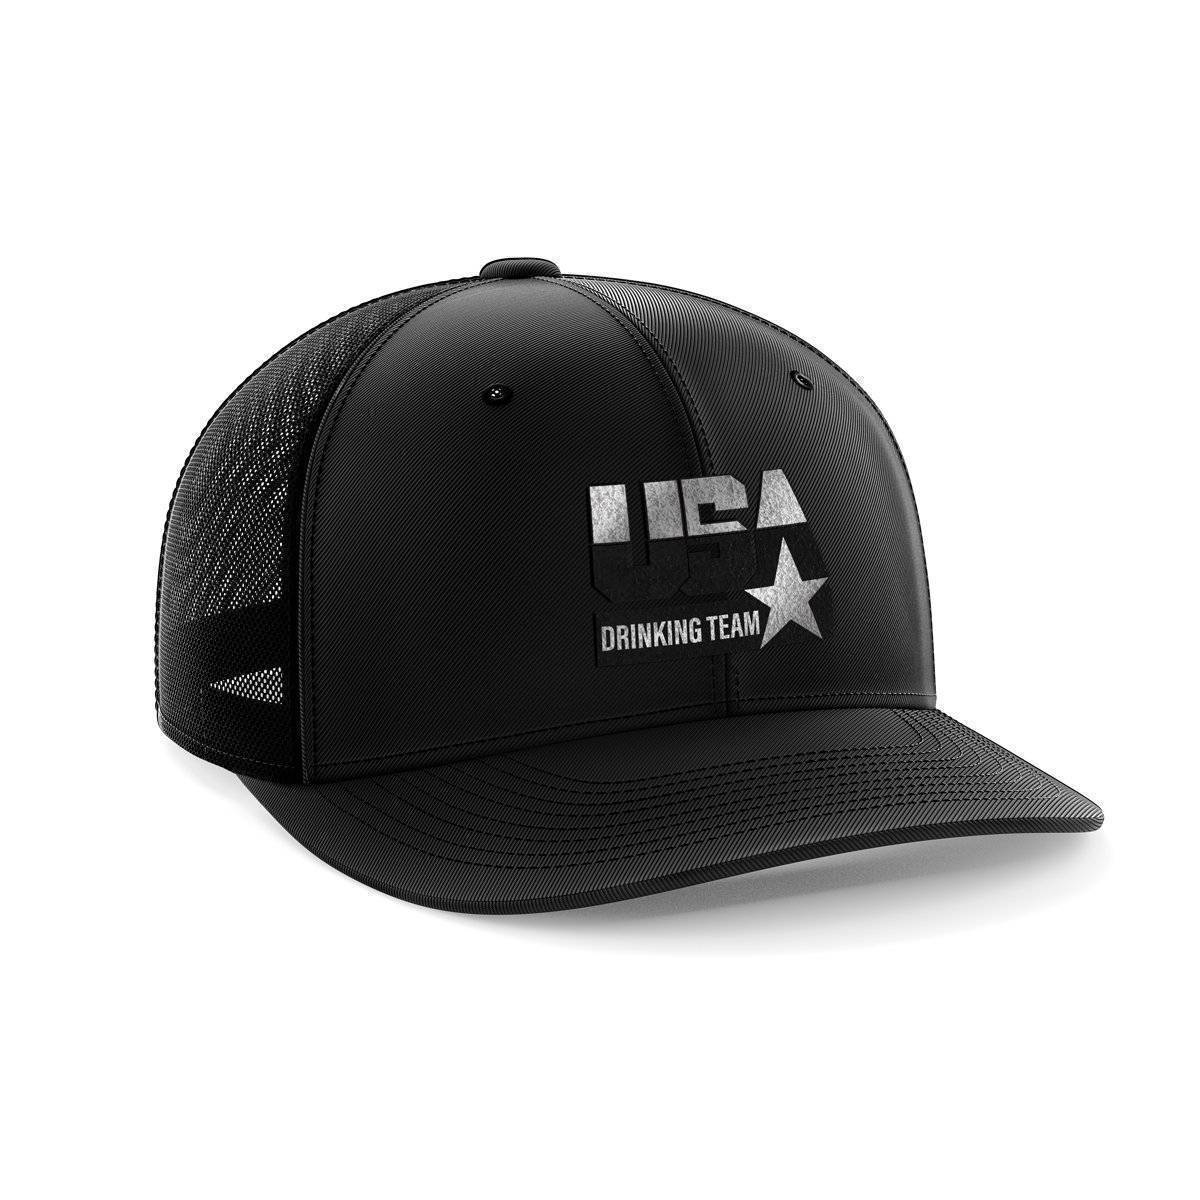 Thumbnail for USA Drinking Team Patch Hat - Greater Half